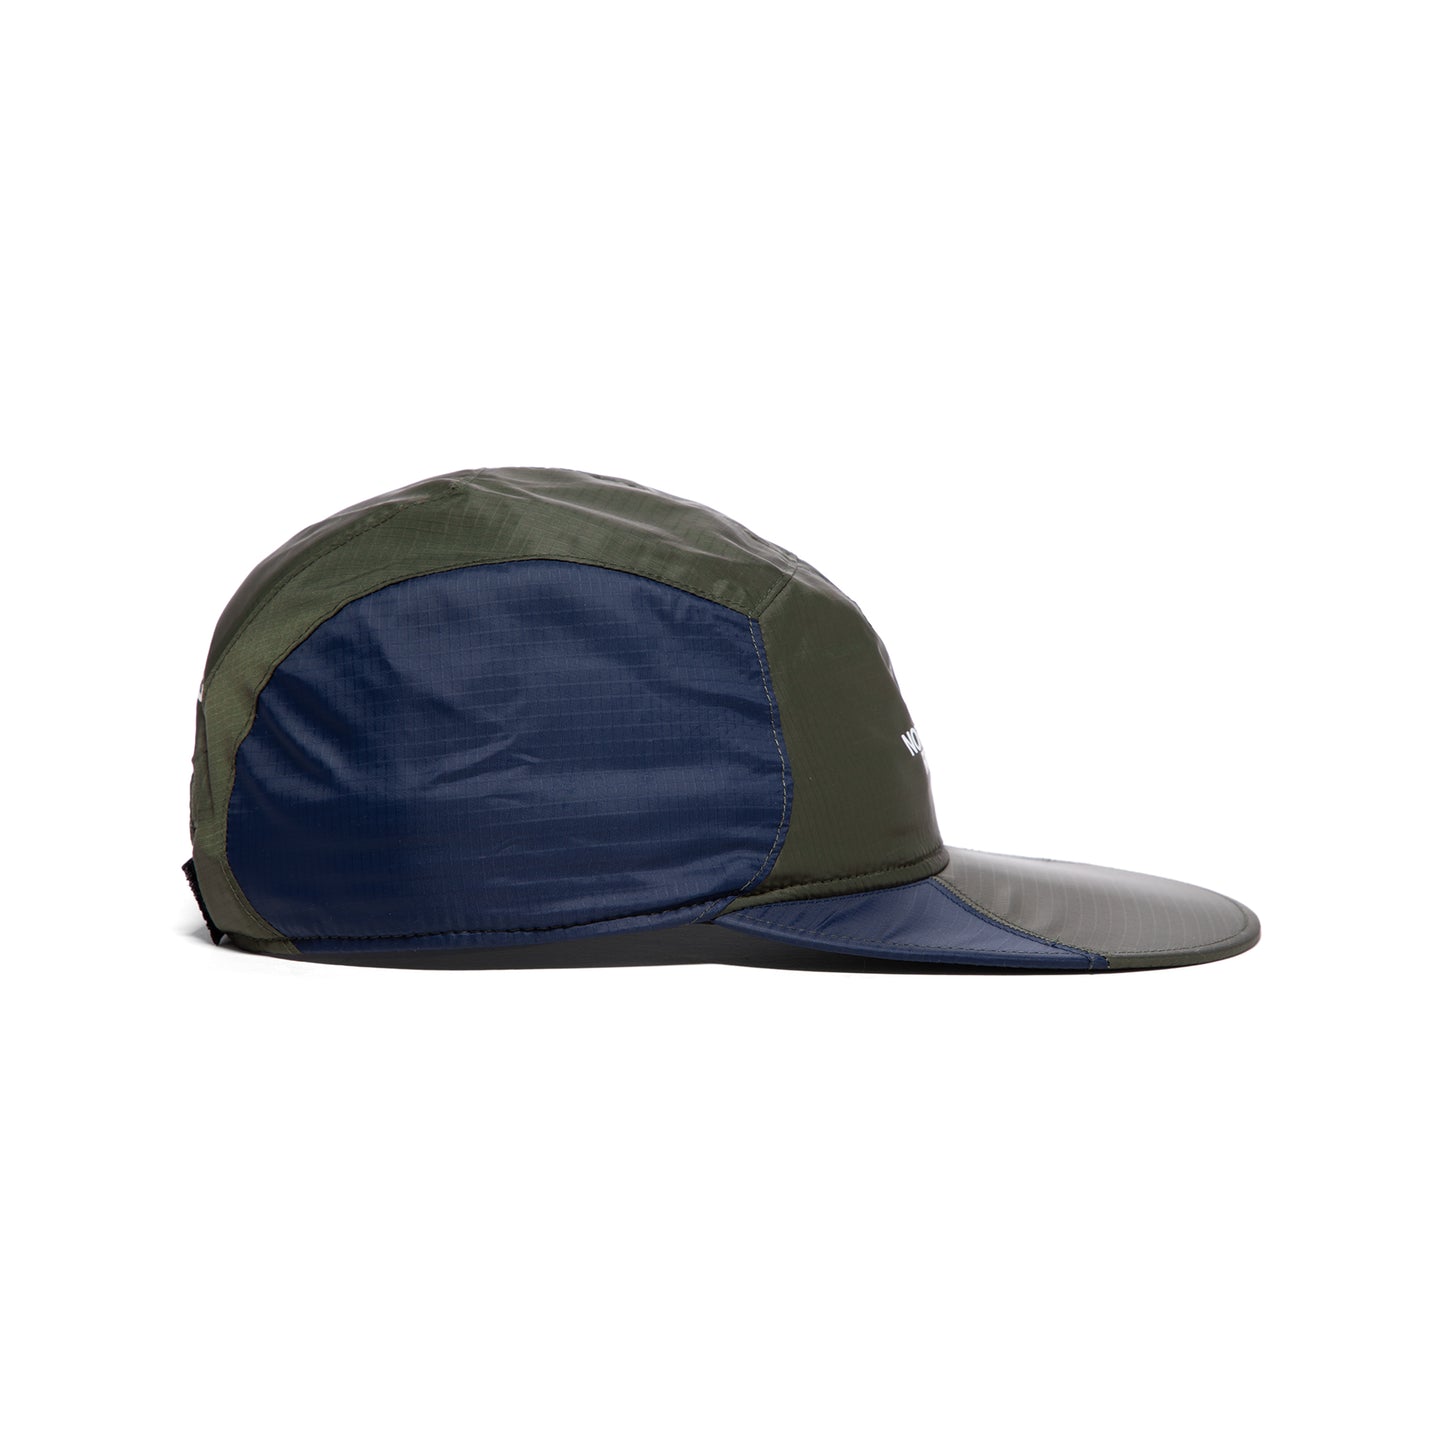 The North Face 92 Retro Cap (New Taupe Green/Summit Navy/TNF Black)